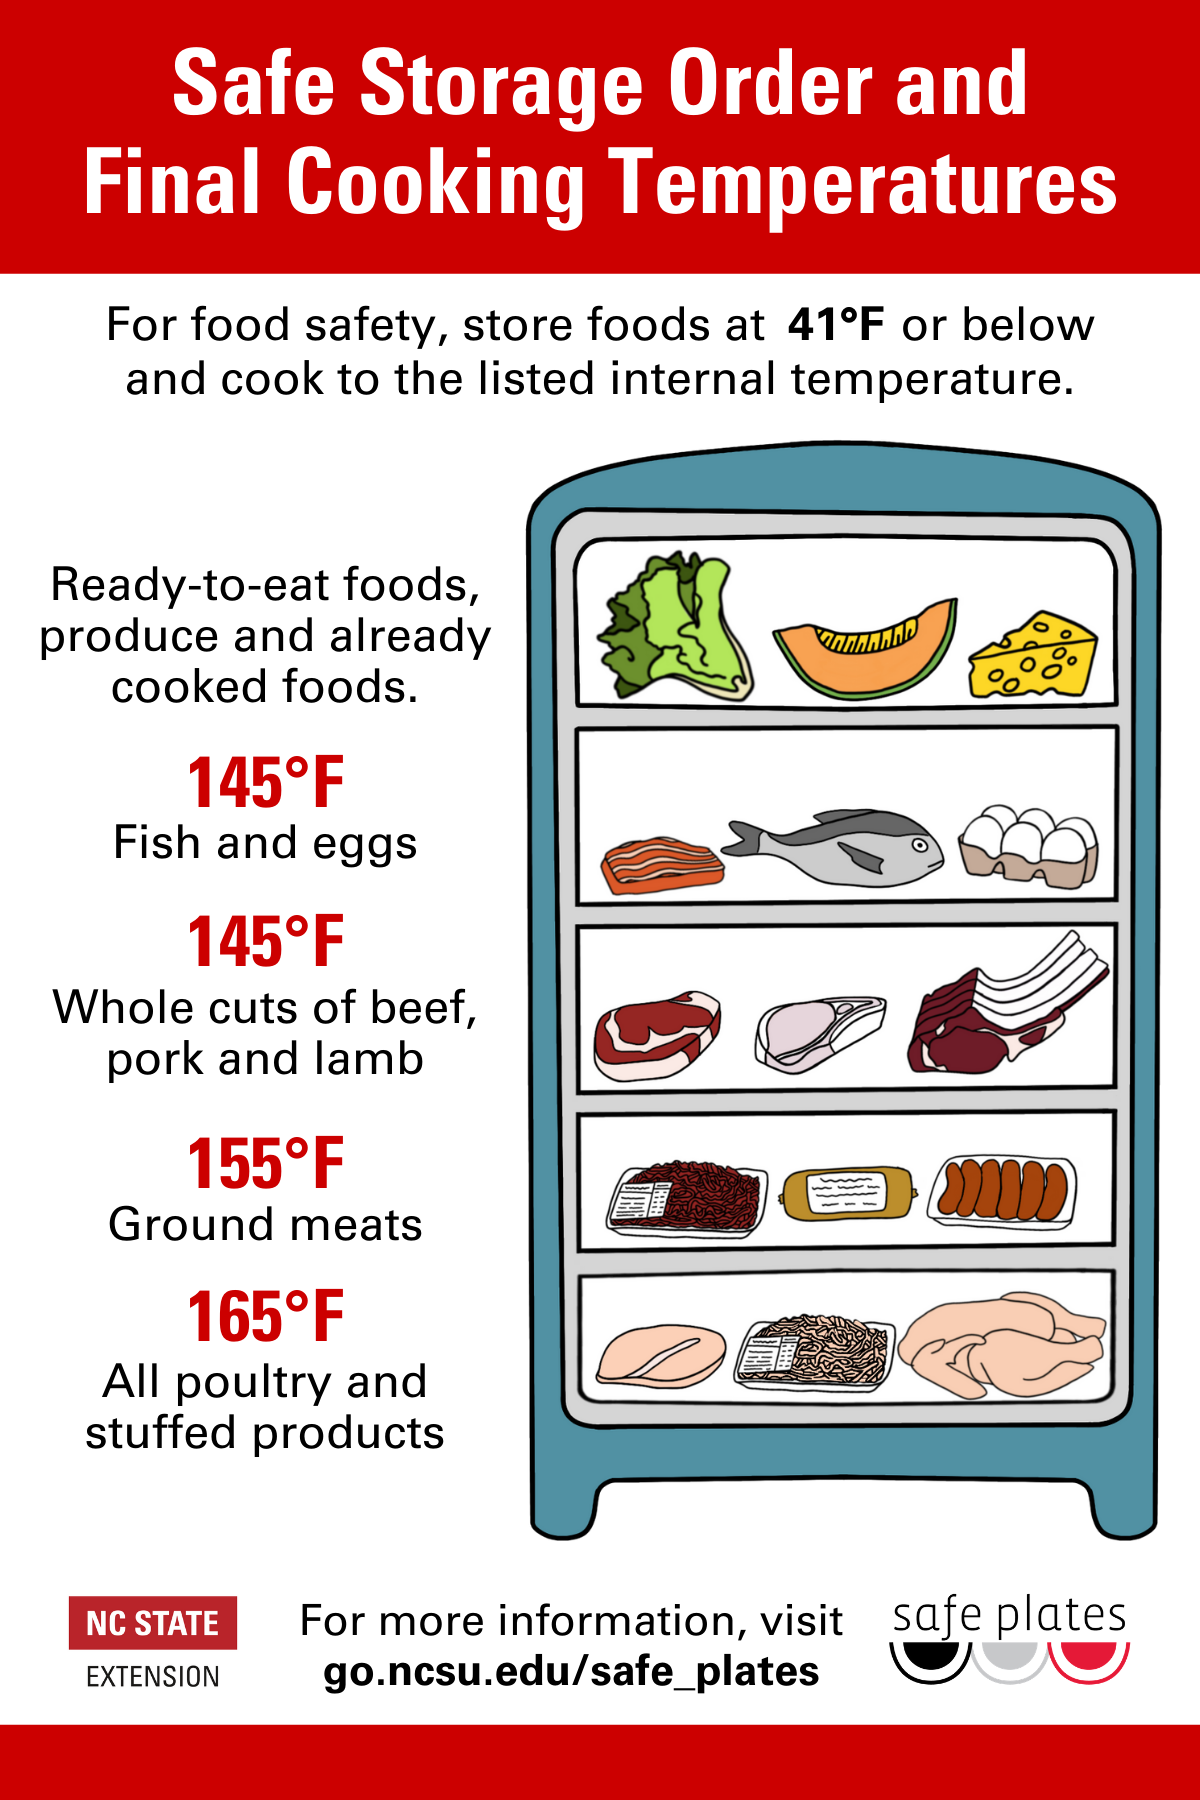 Safe Cooking Temperatures: How to Use a Food Thermometer